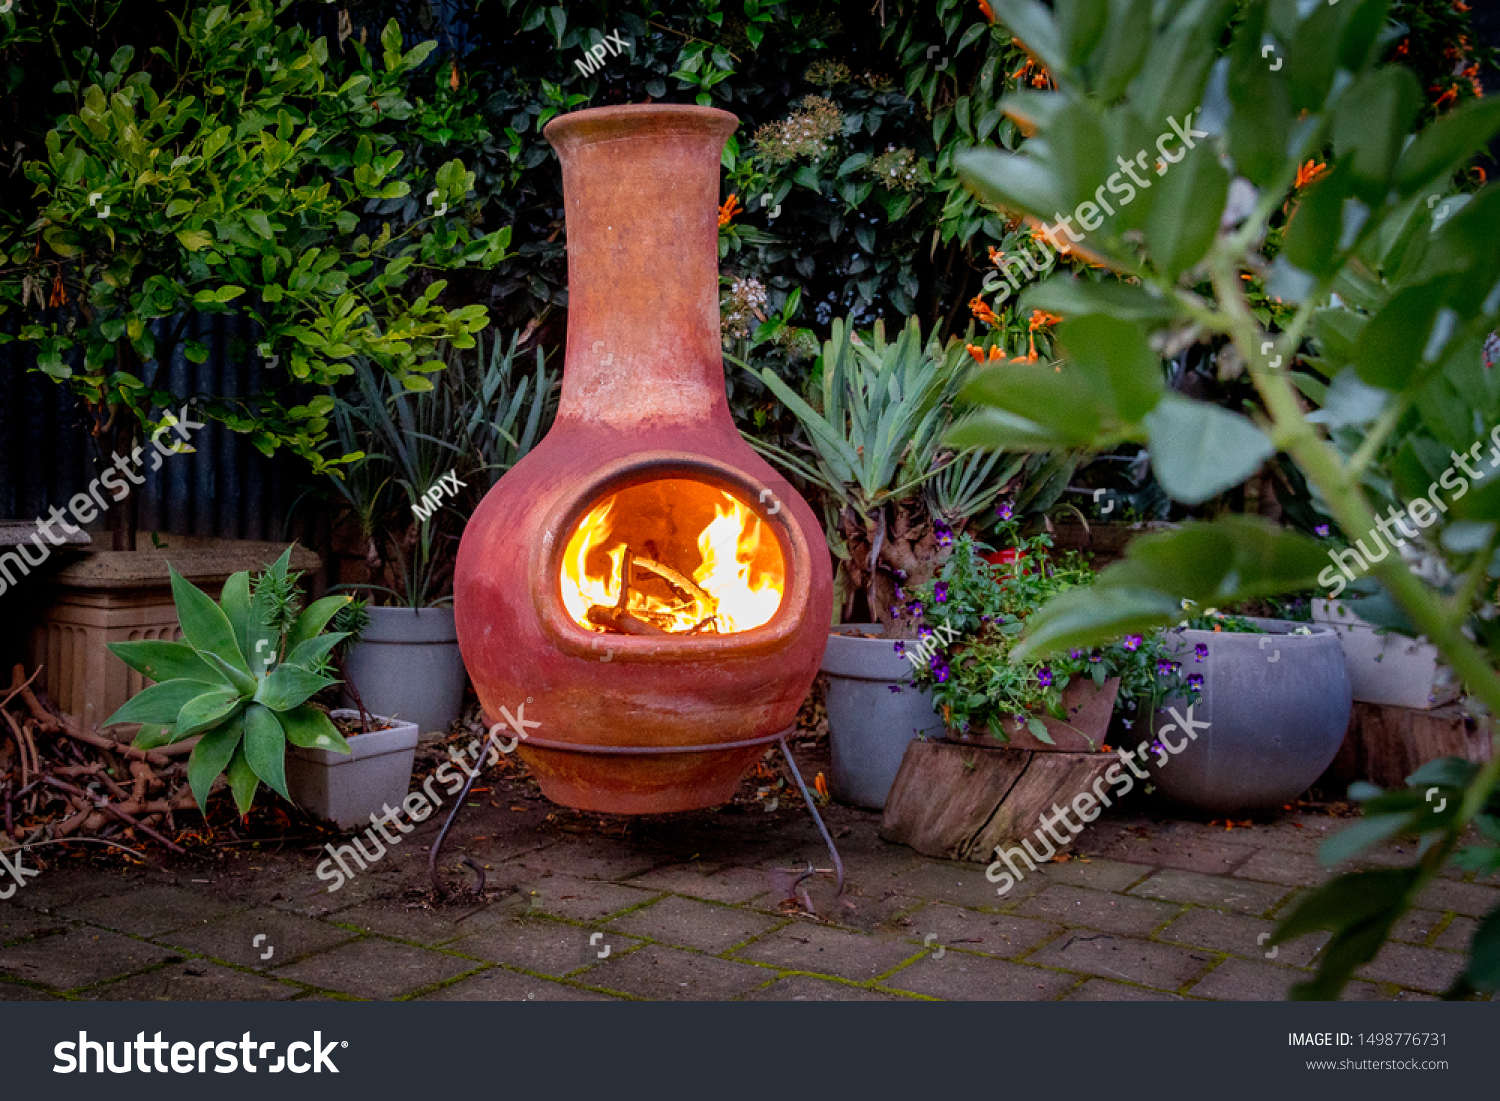 A Chimenea in the backyard.

A backyard fire place surrounded by plants. #1498776731